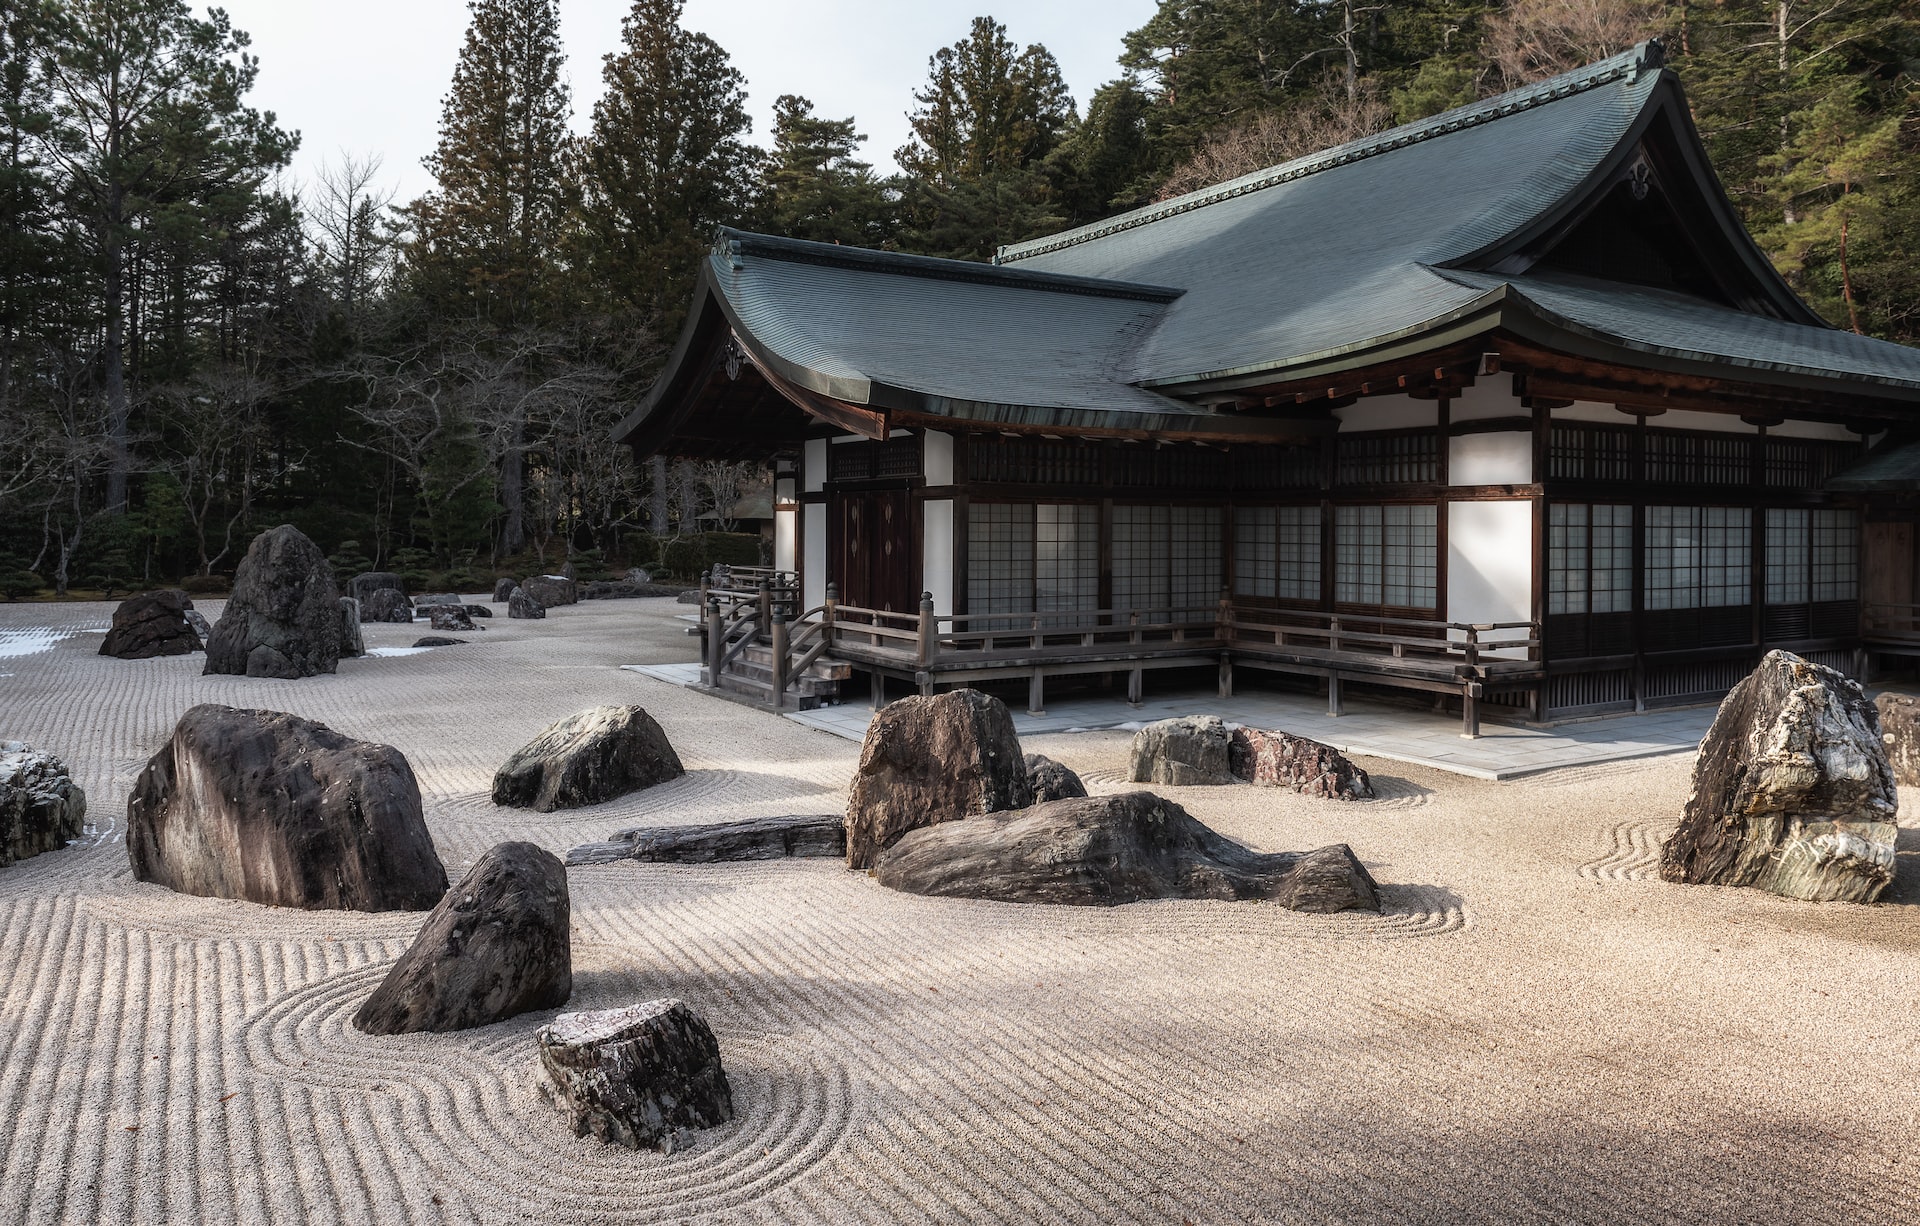 A meditation garden with rocks and sand surrounds a Japanese-style house.